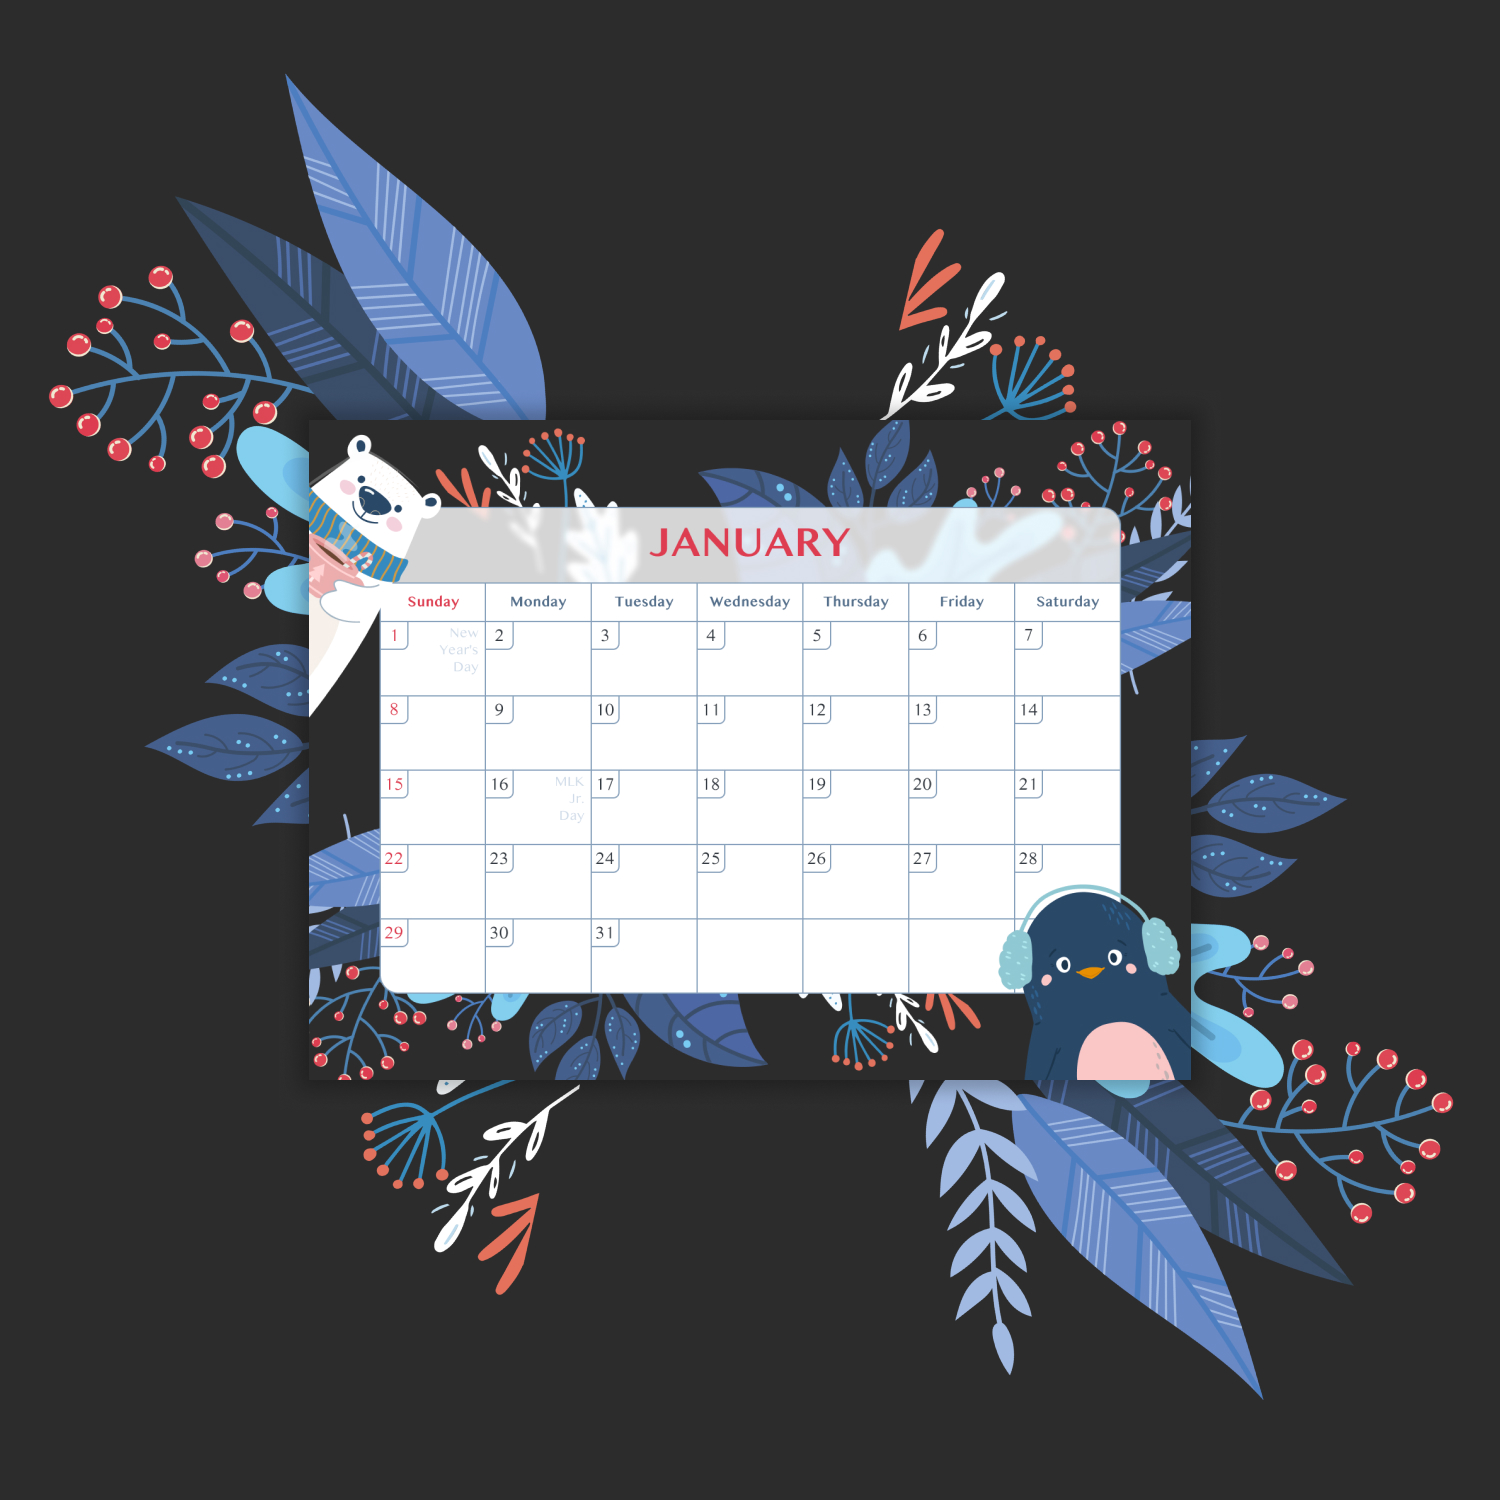 Free January Calendar with Holidays cover.